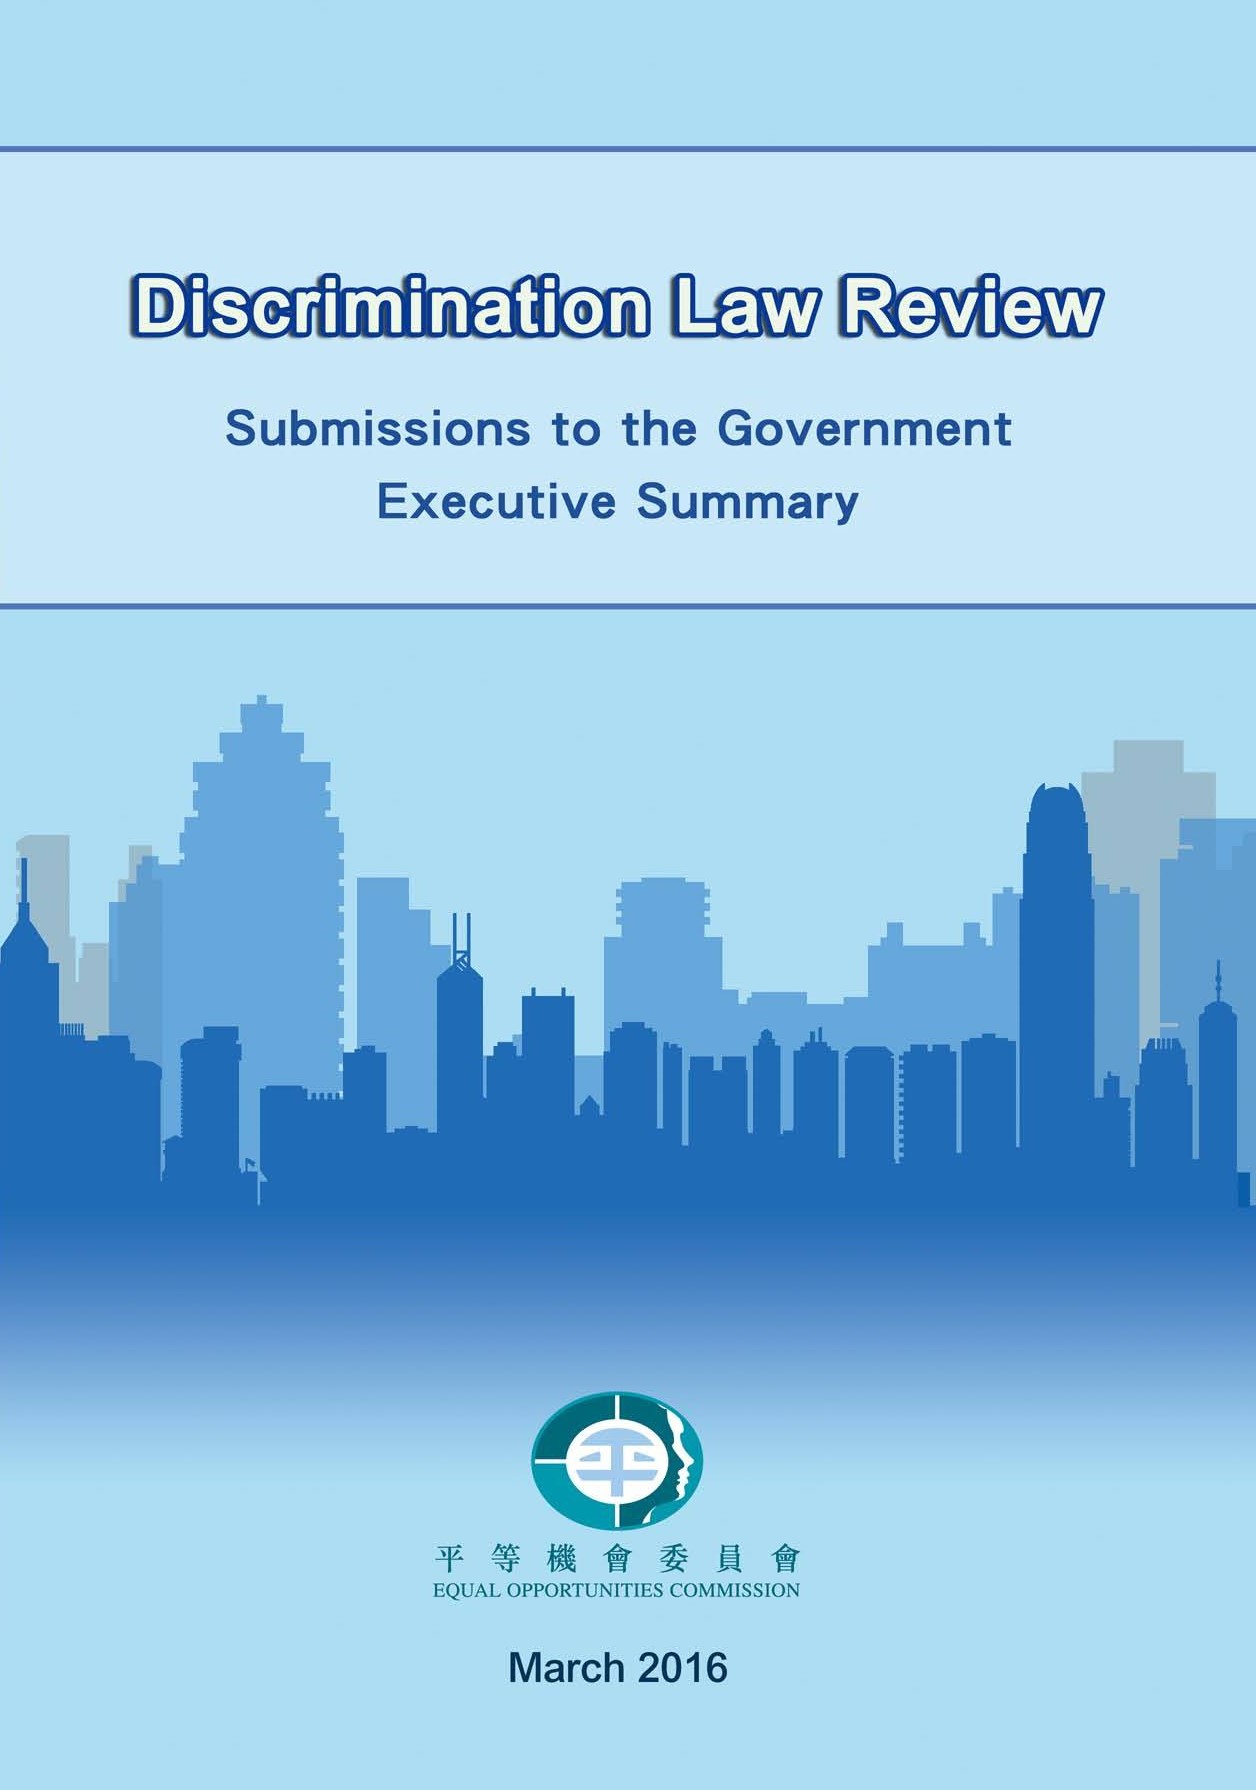 Cover of the Discrimination Law Review Executive Summary